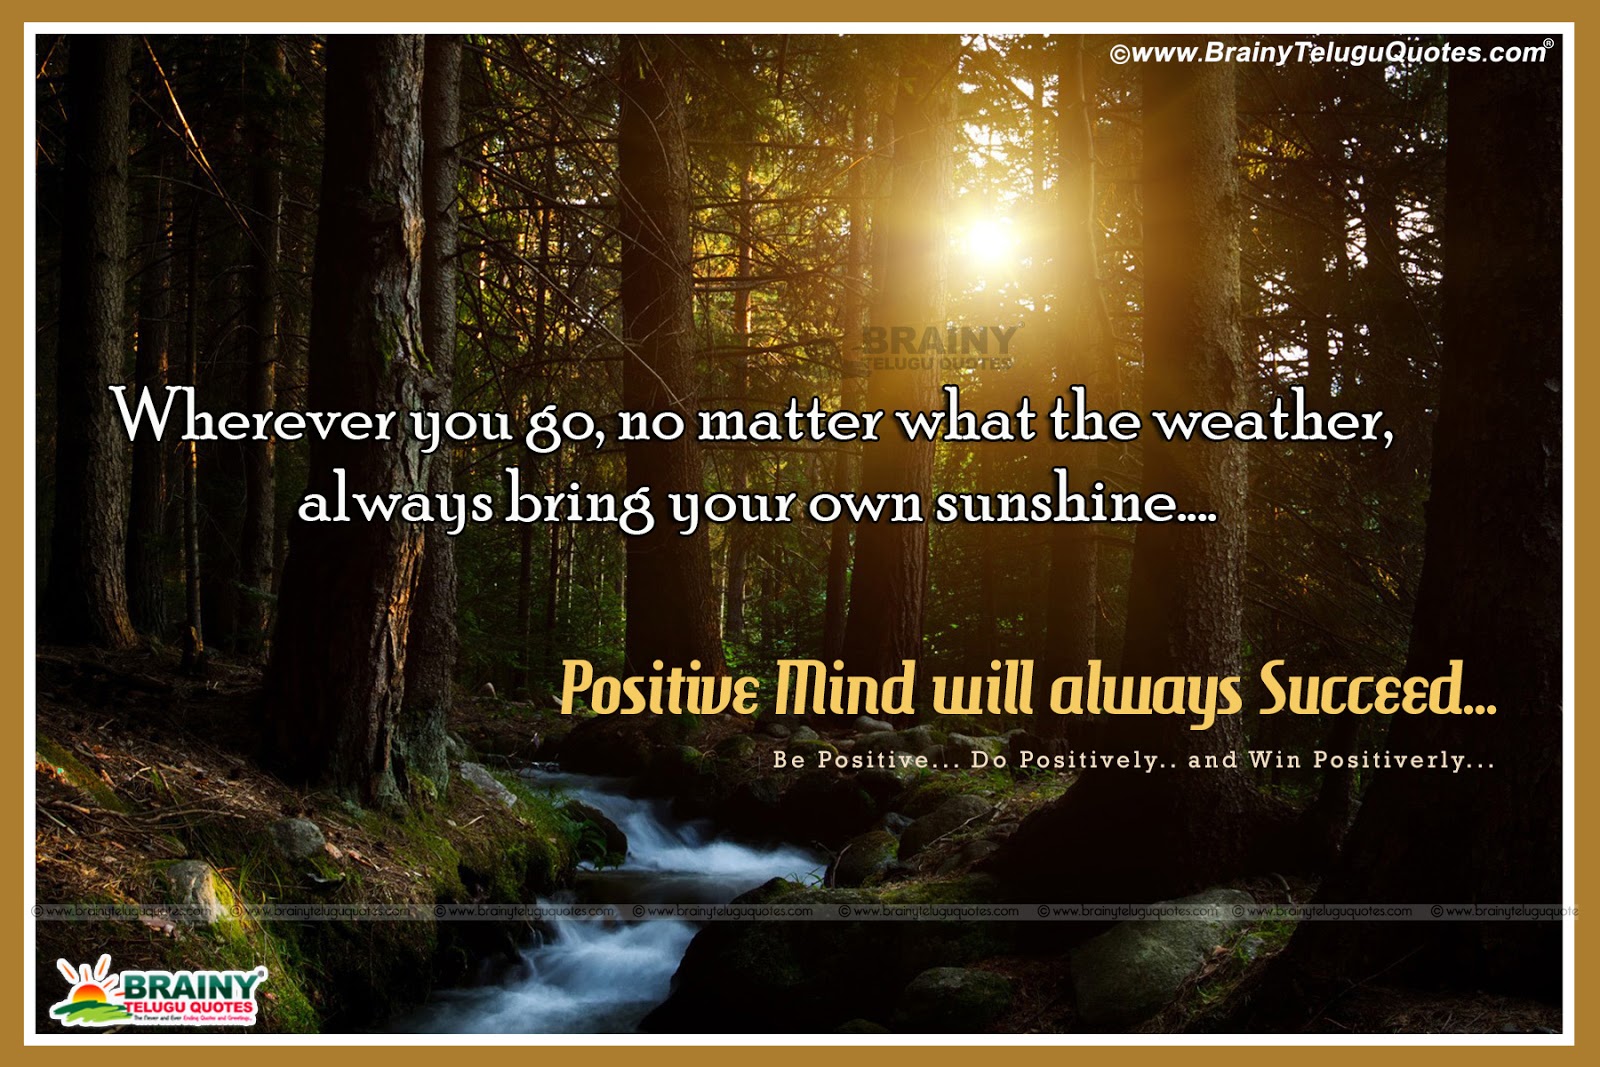 English Quotes About Positive Attitude, Attitude Valuable - Sunset Forest Wallpaper Hd - HD Wallpaper 